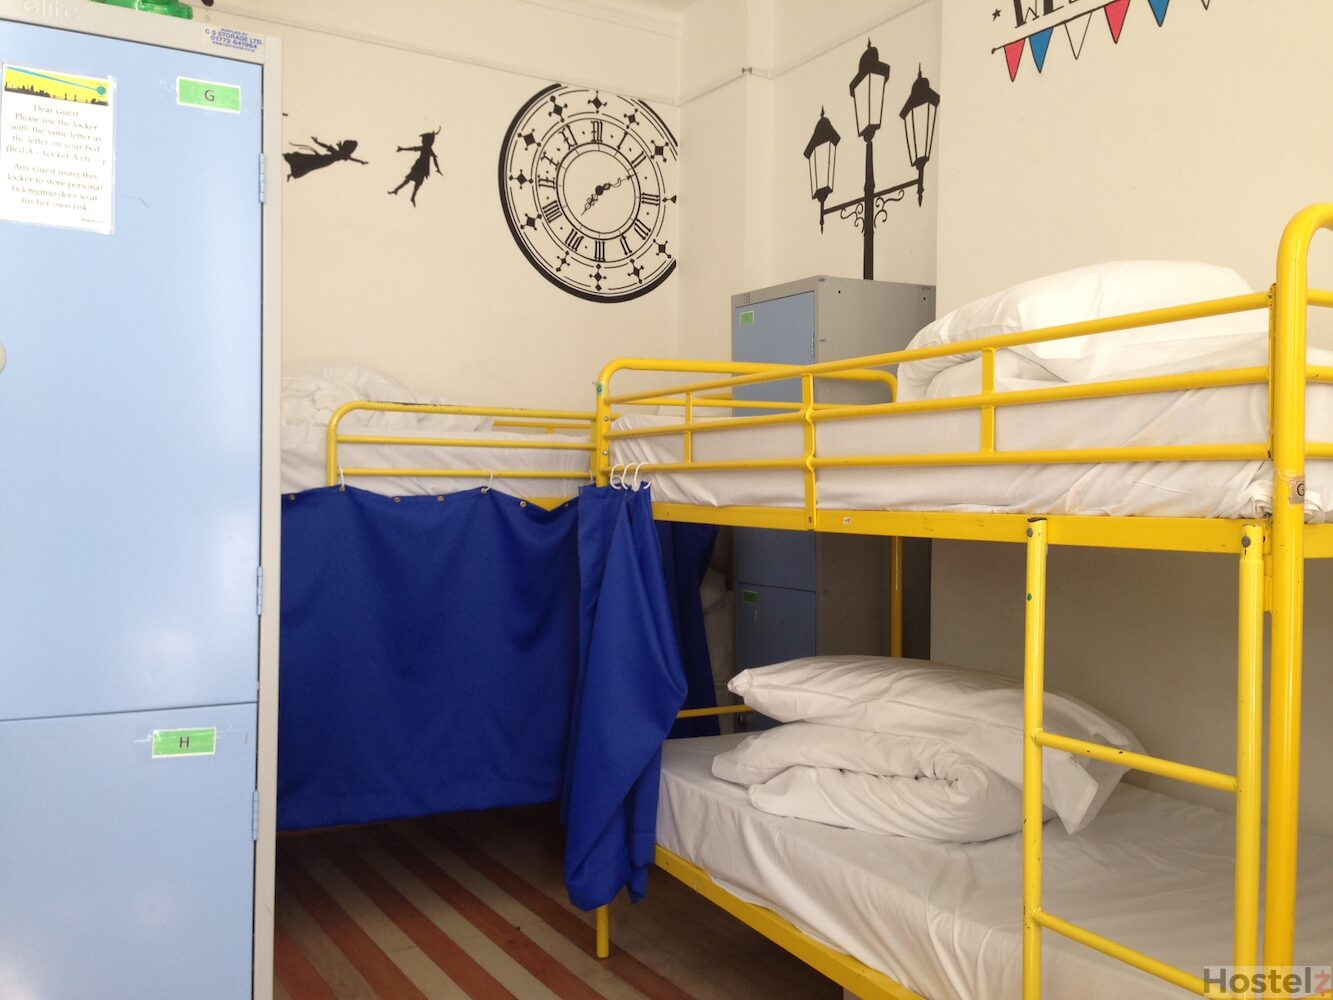 12 bed dorm with privacy screens